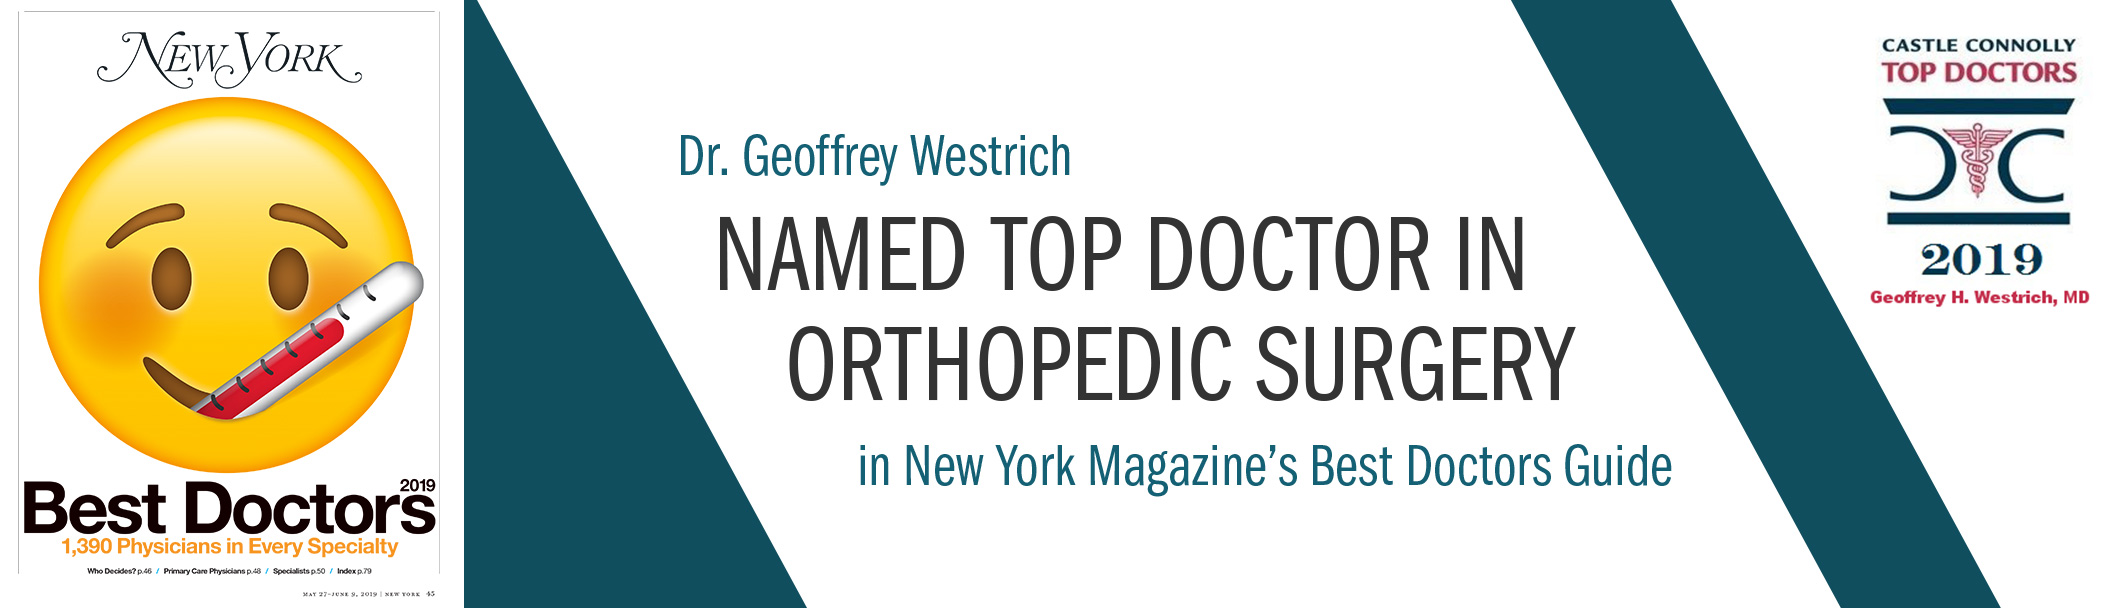 Top Doctor in Orthopedic Surgery